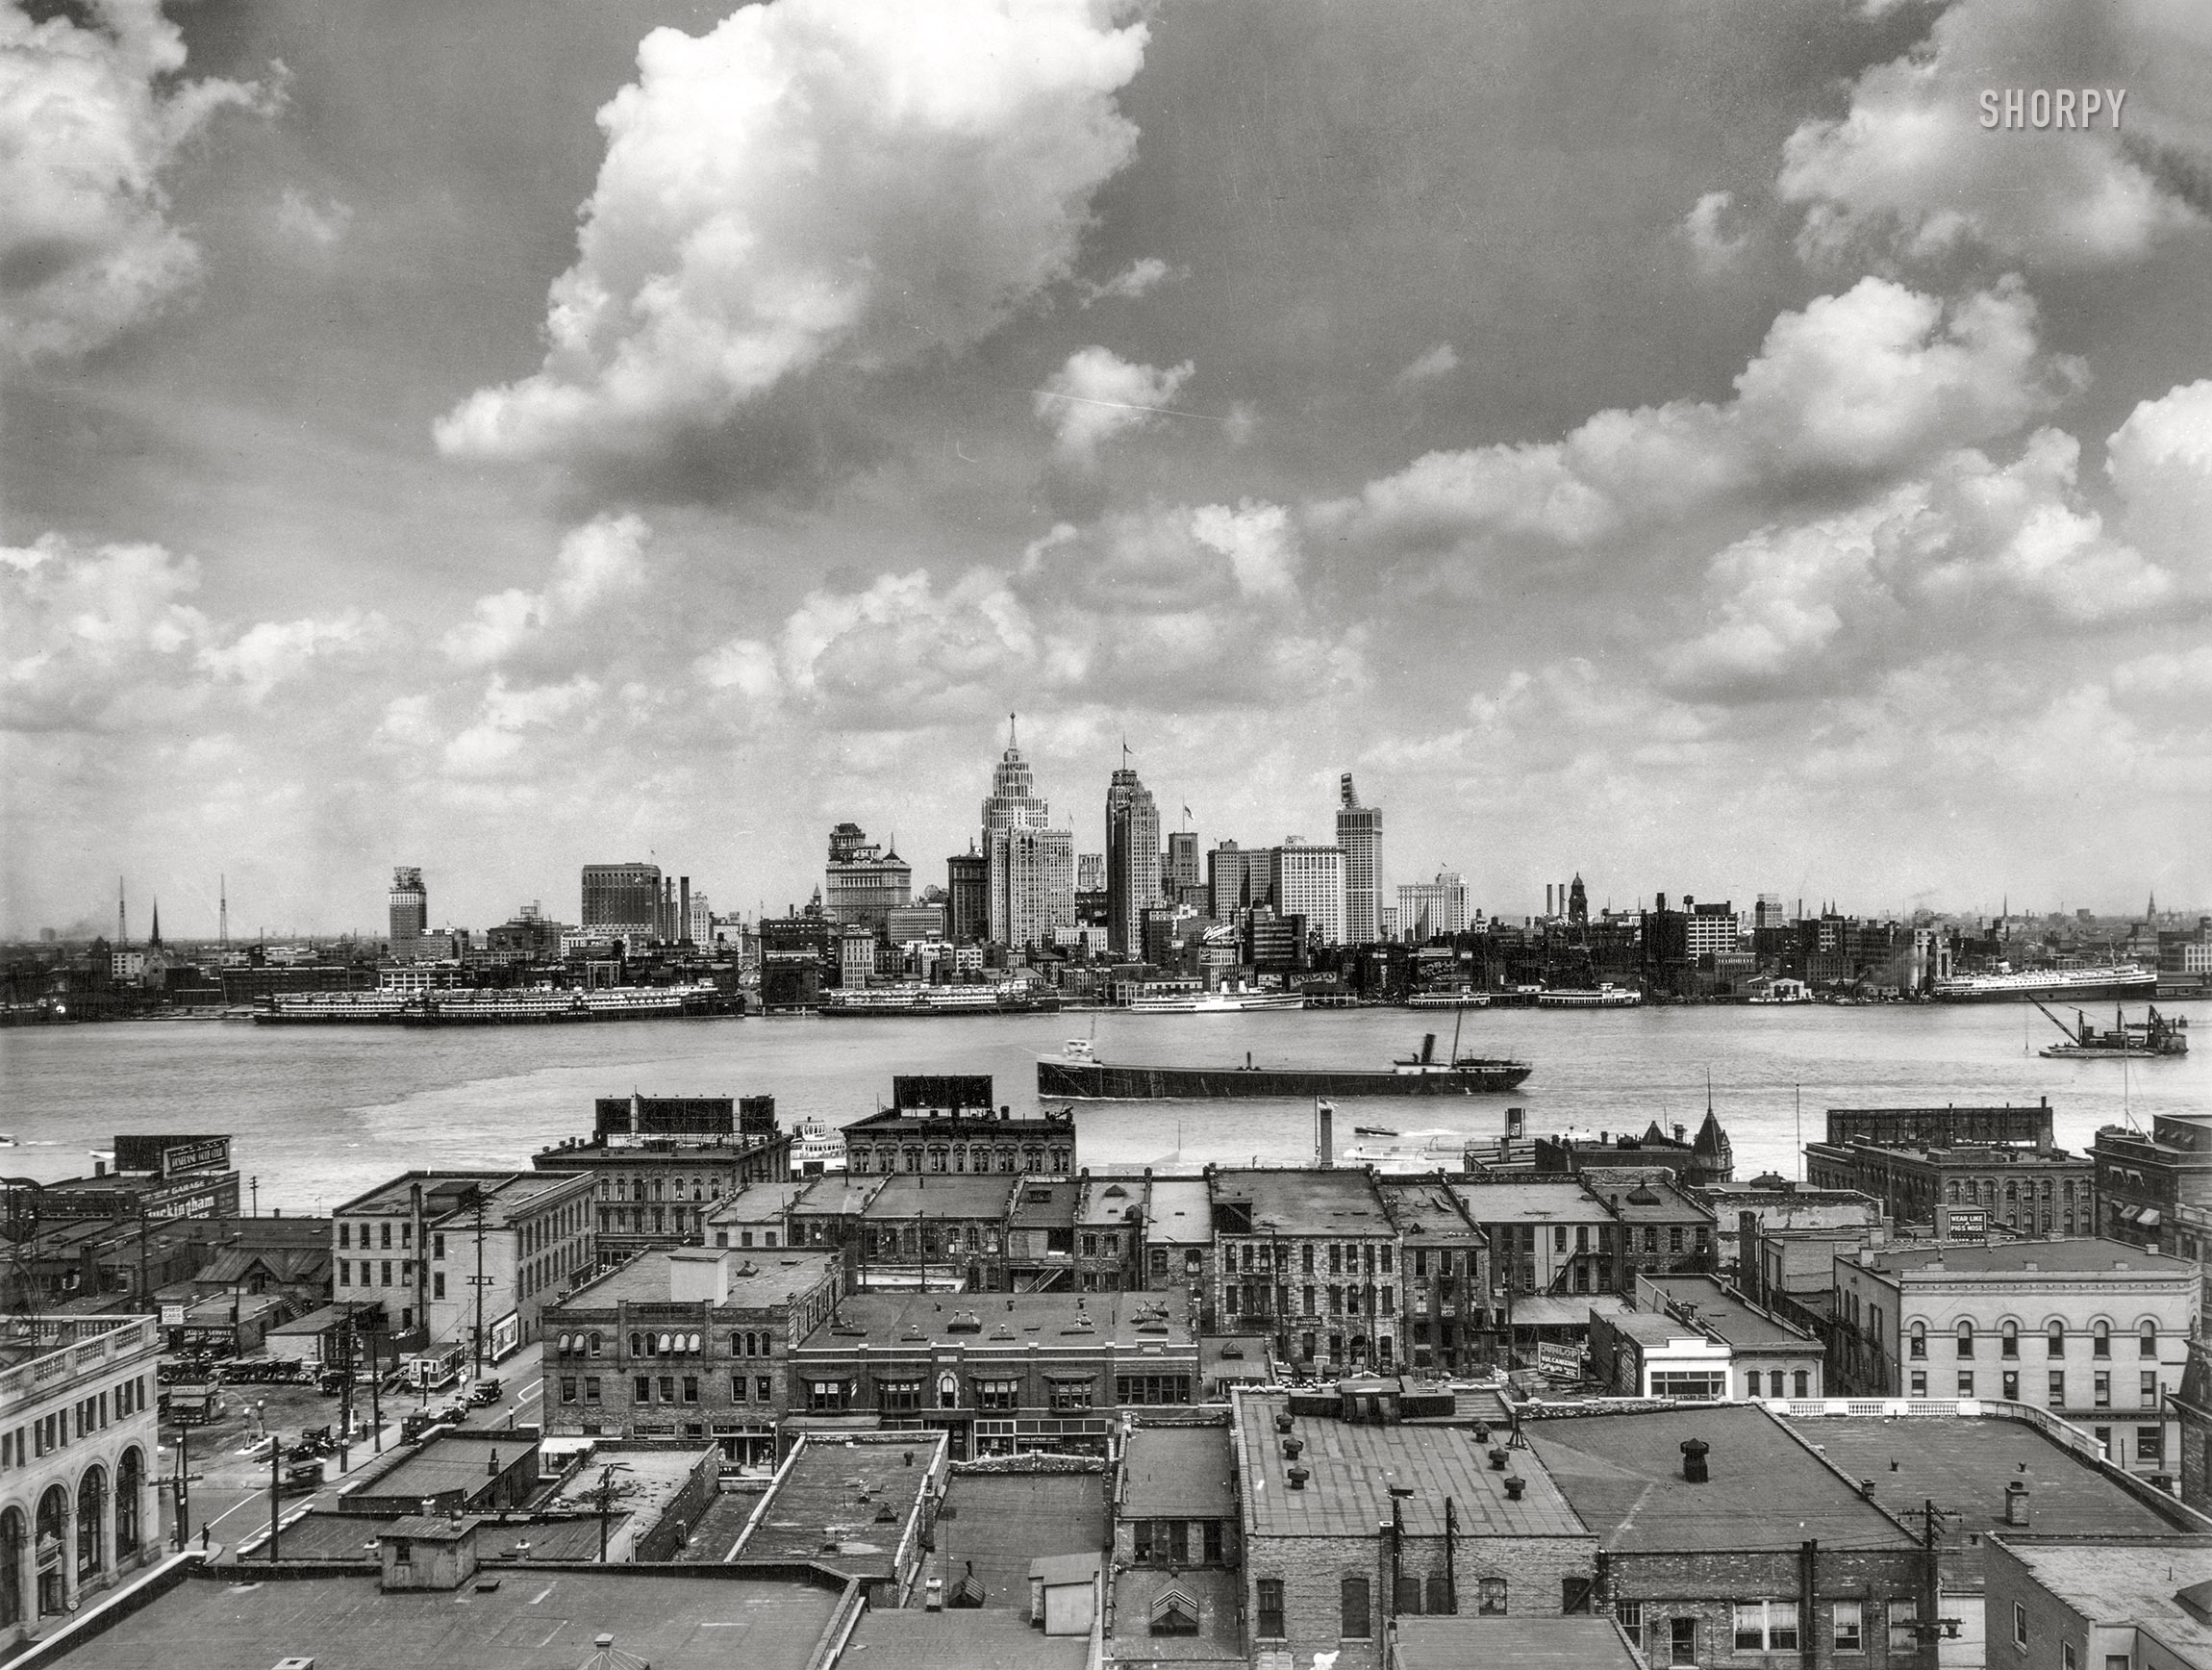 Detroit, 1929. "Skyline and boats on the Detroit River as seen from Windsor, Ontario." Gelatin silver print, Library of Congress Prints & Photographs Collection. View full size.